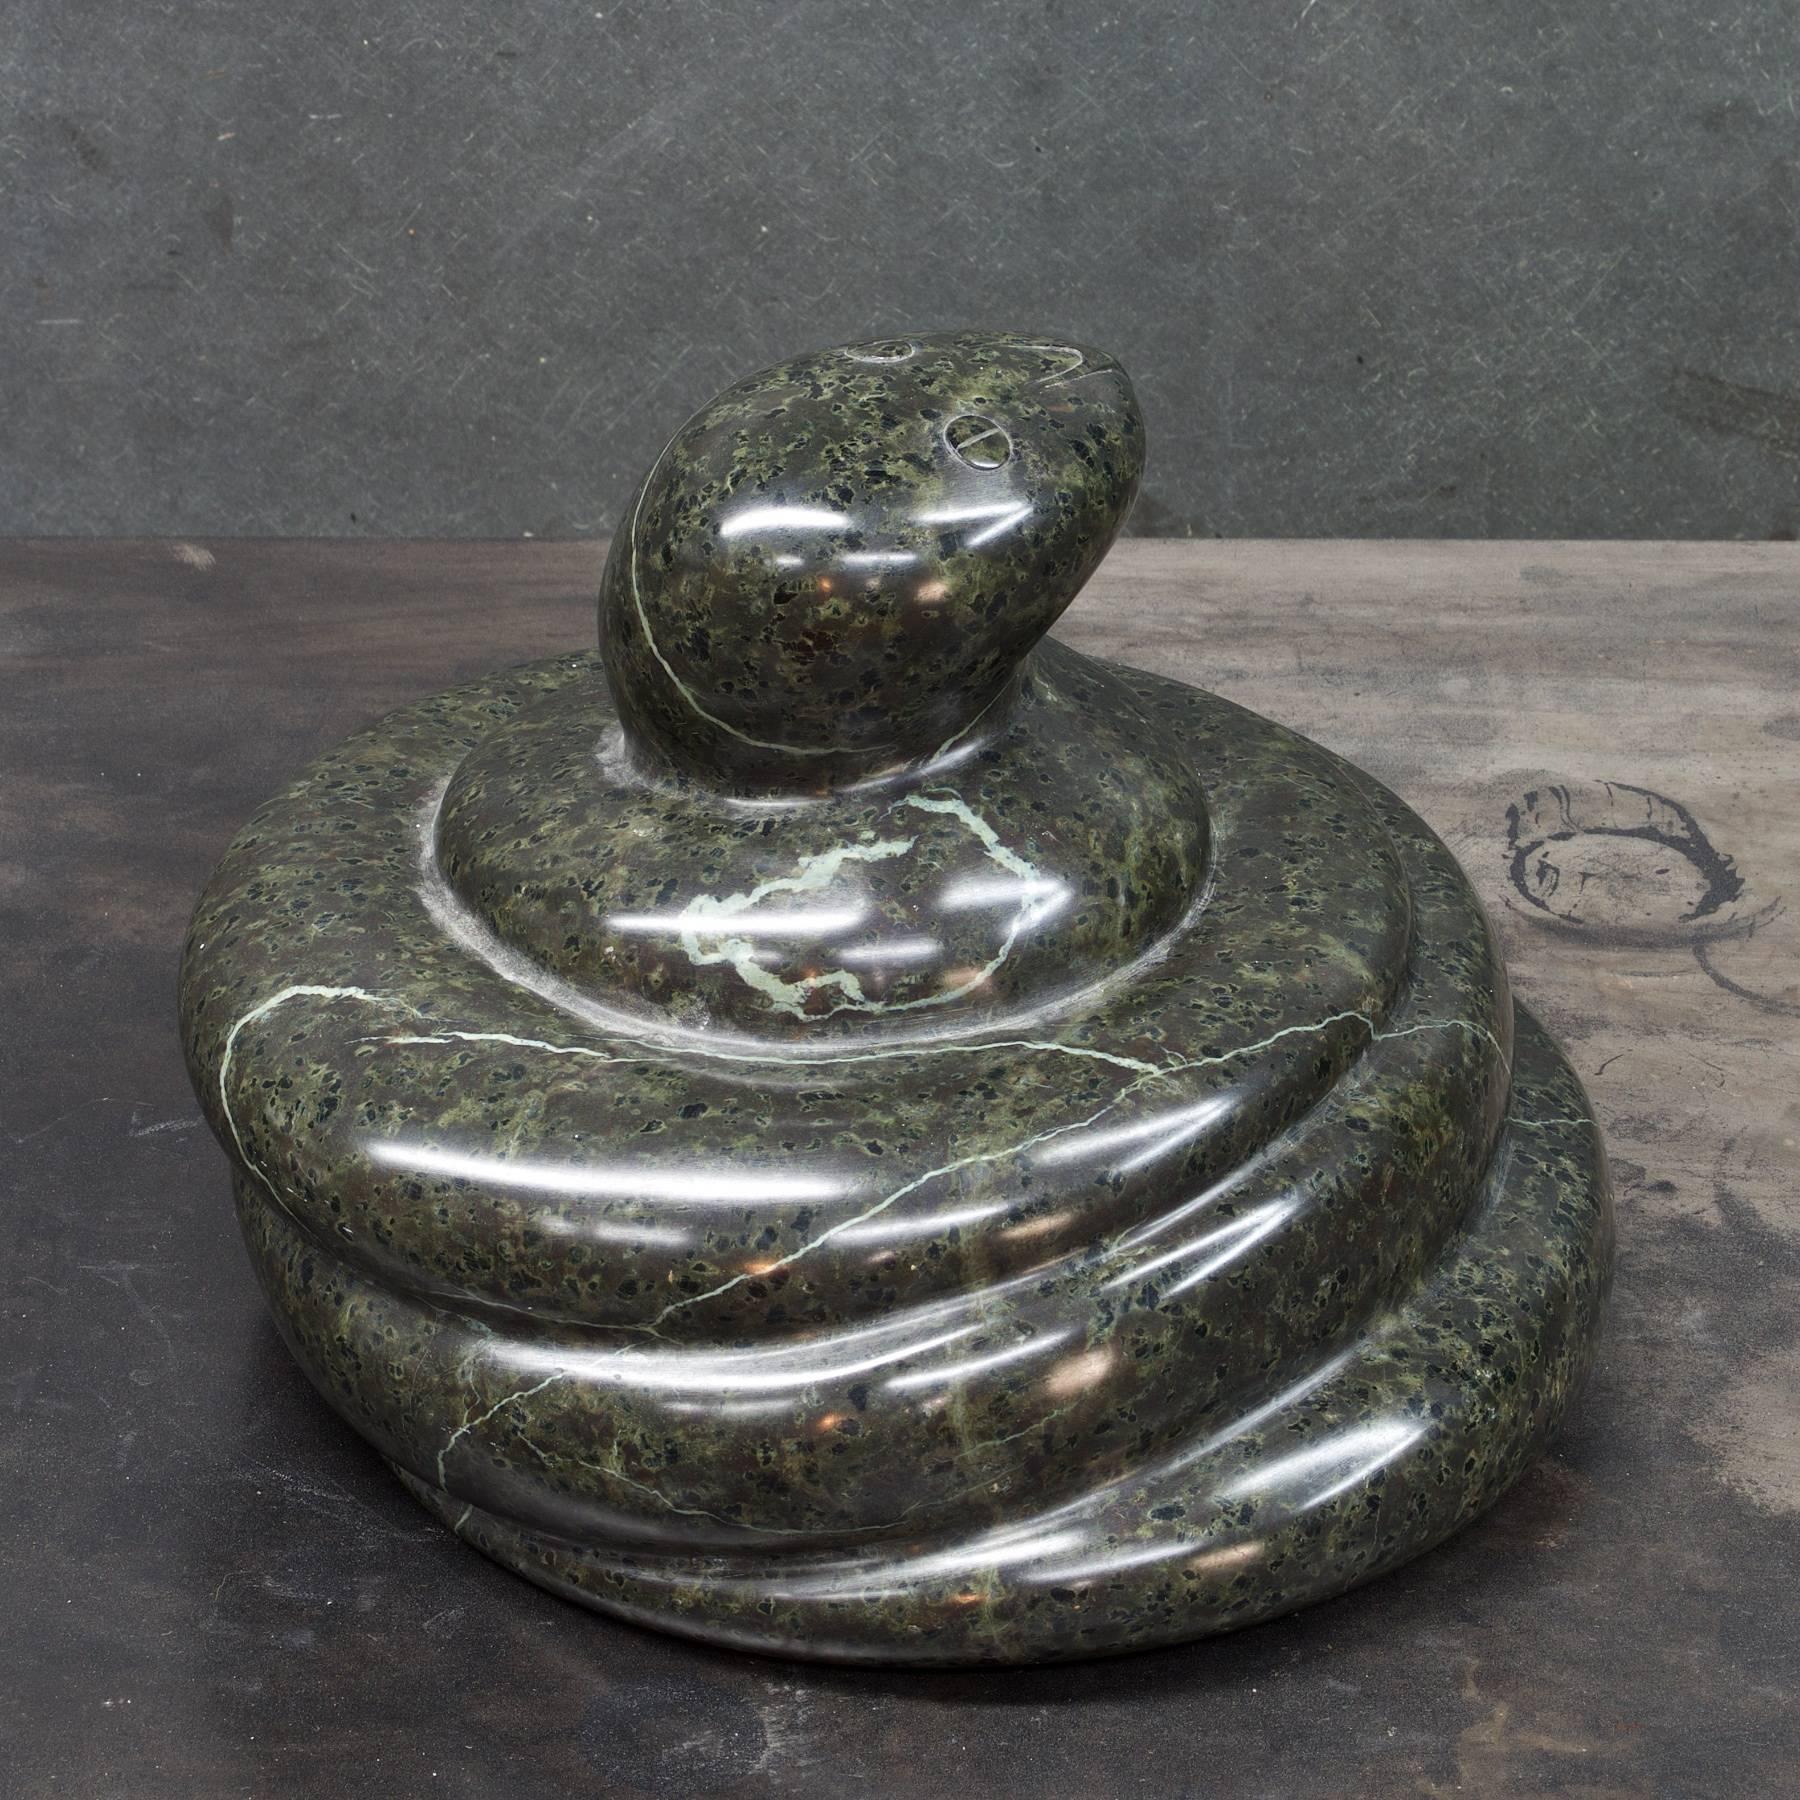 snake statue for sale